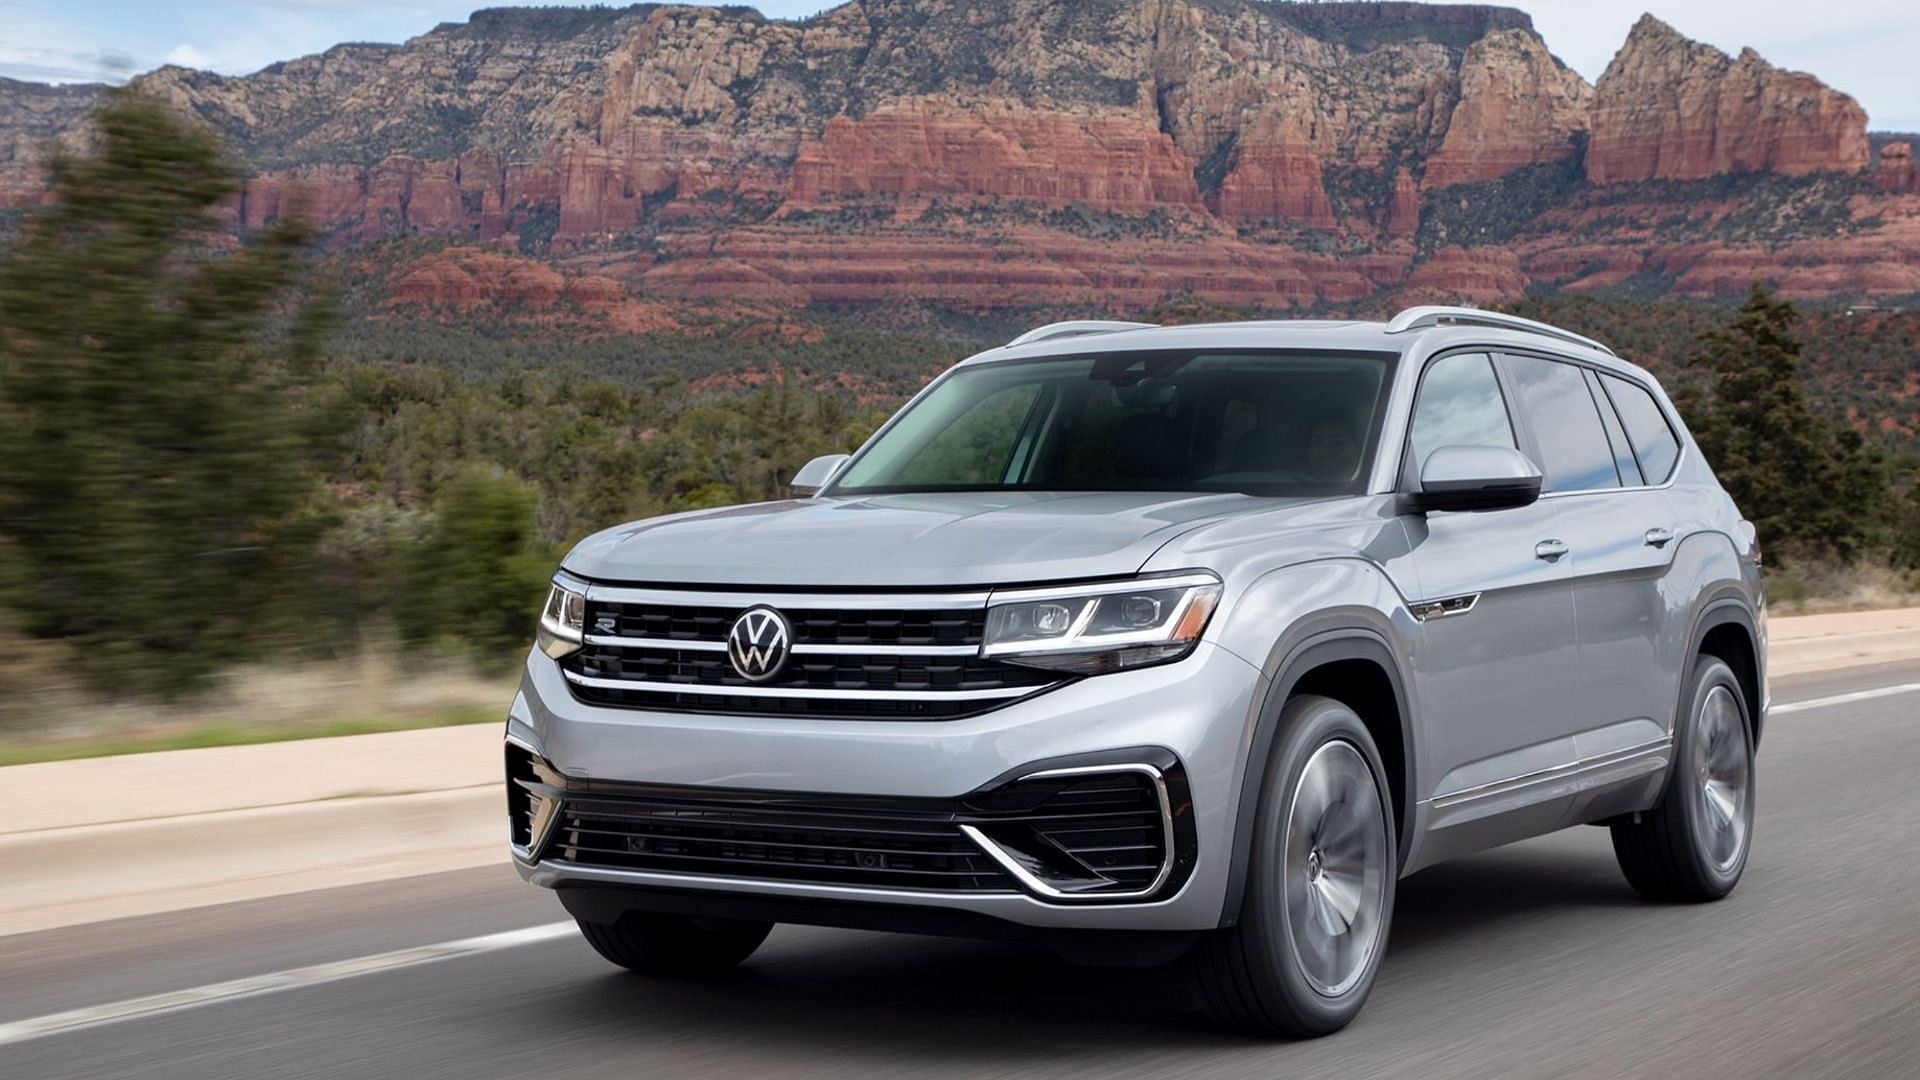 Volkswagen Atlas recall Reason, affected model, and all you need to know